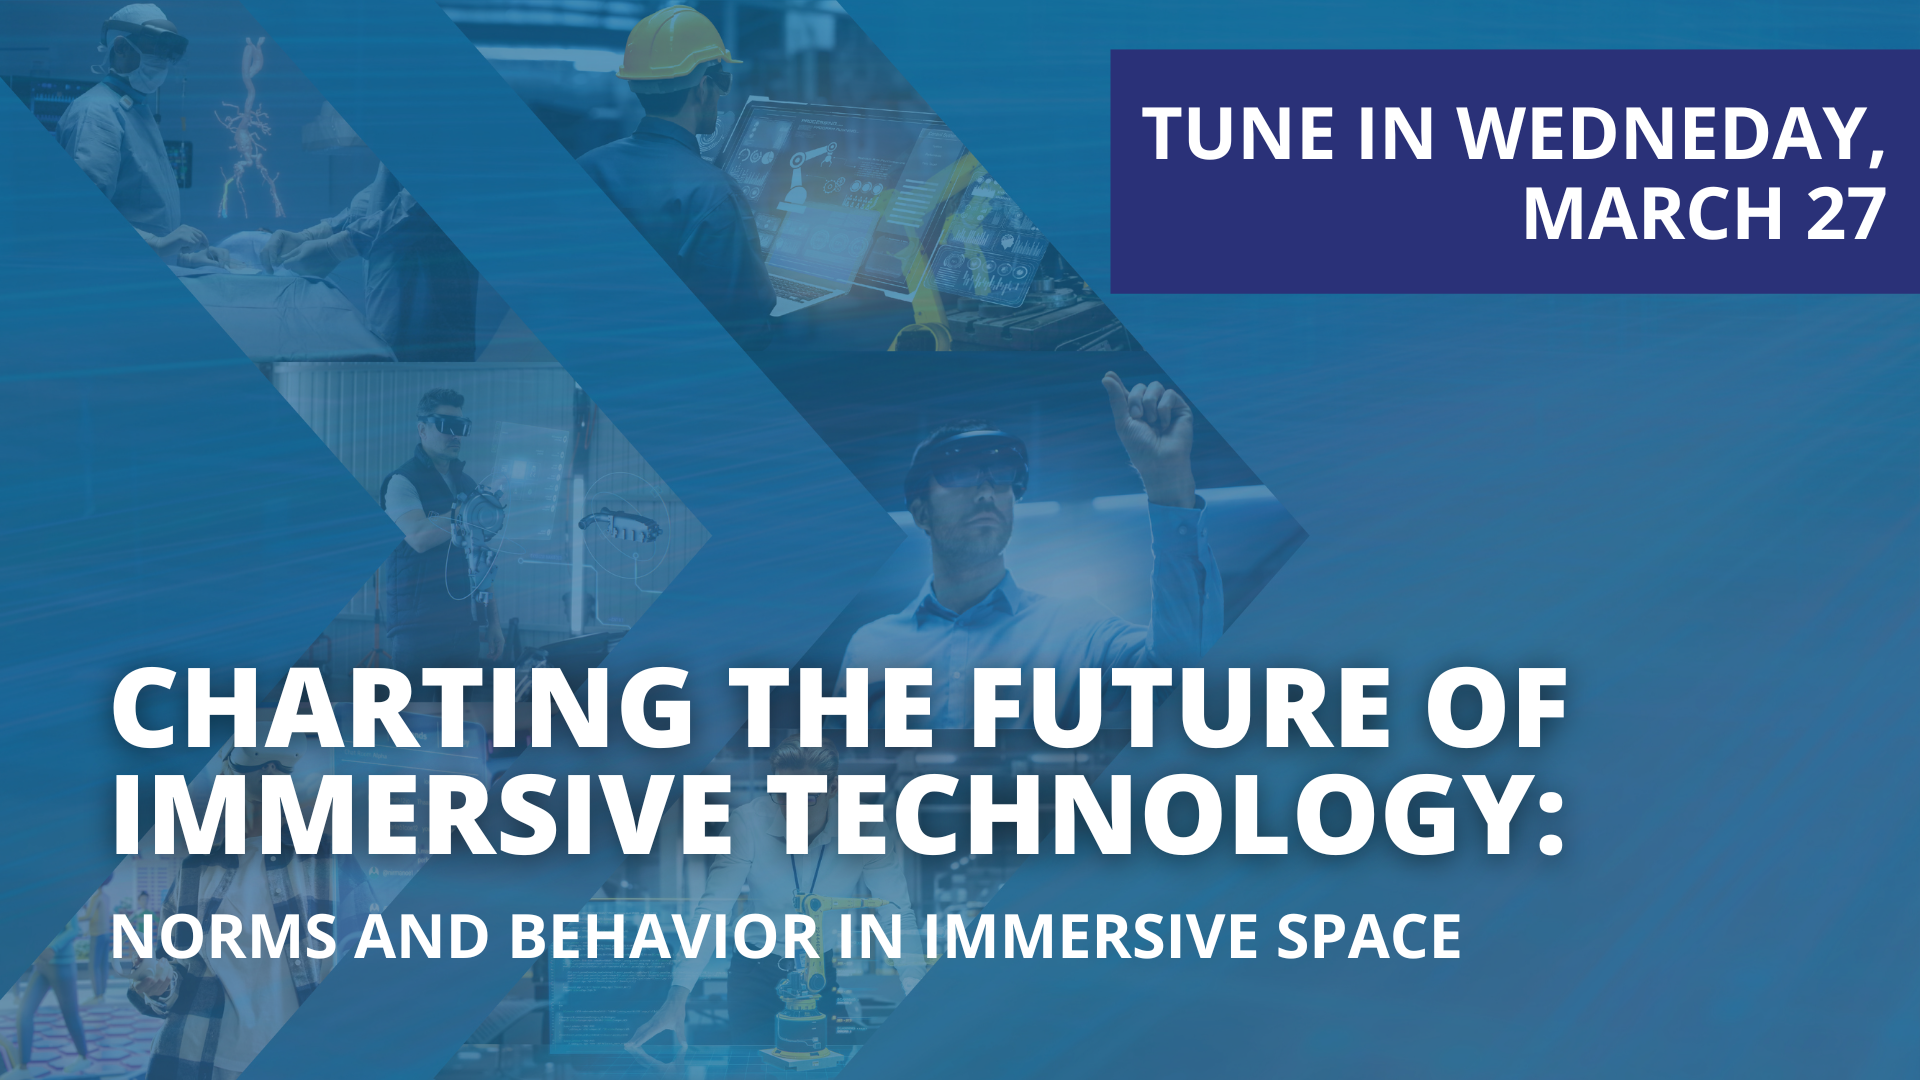 XR ASSOCIATION TO HOST FIVE-PART WEBINAR SERIES FOCUSED ON THE FUTURE OF IMMERSIVE TECHNOLOGY